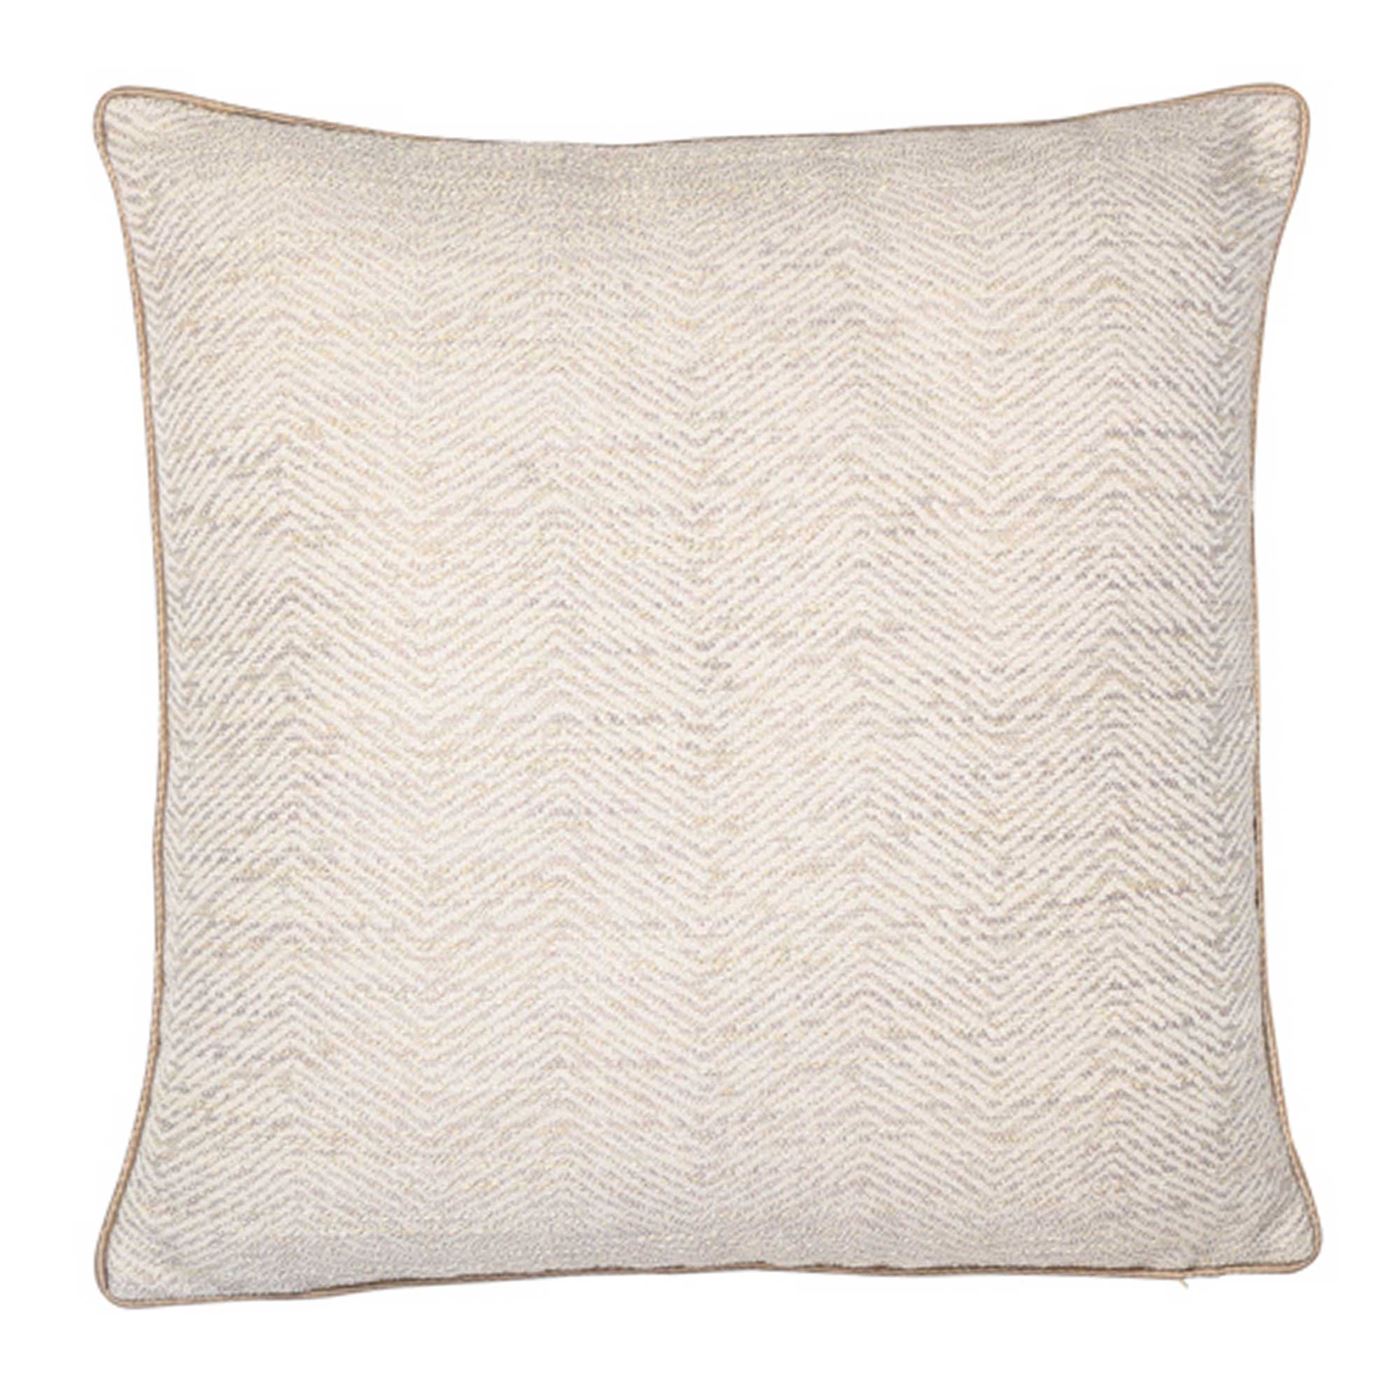 Weave Natural Cushion, Square, Neutral | Barker & Stonehouse